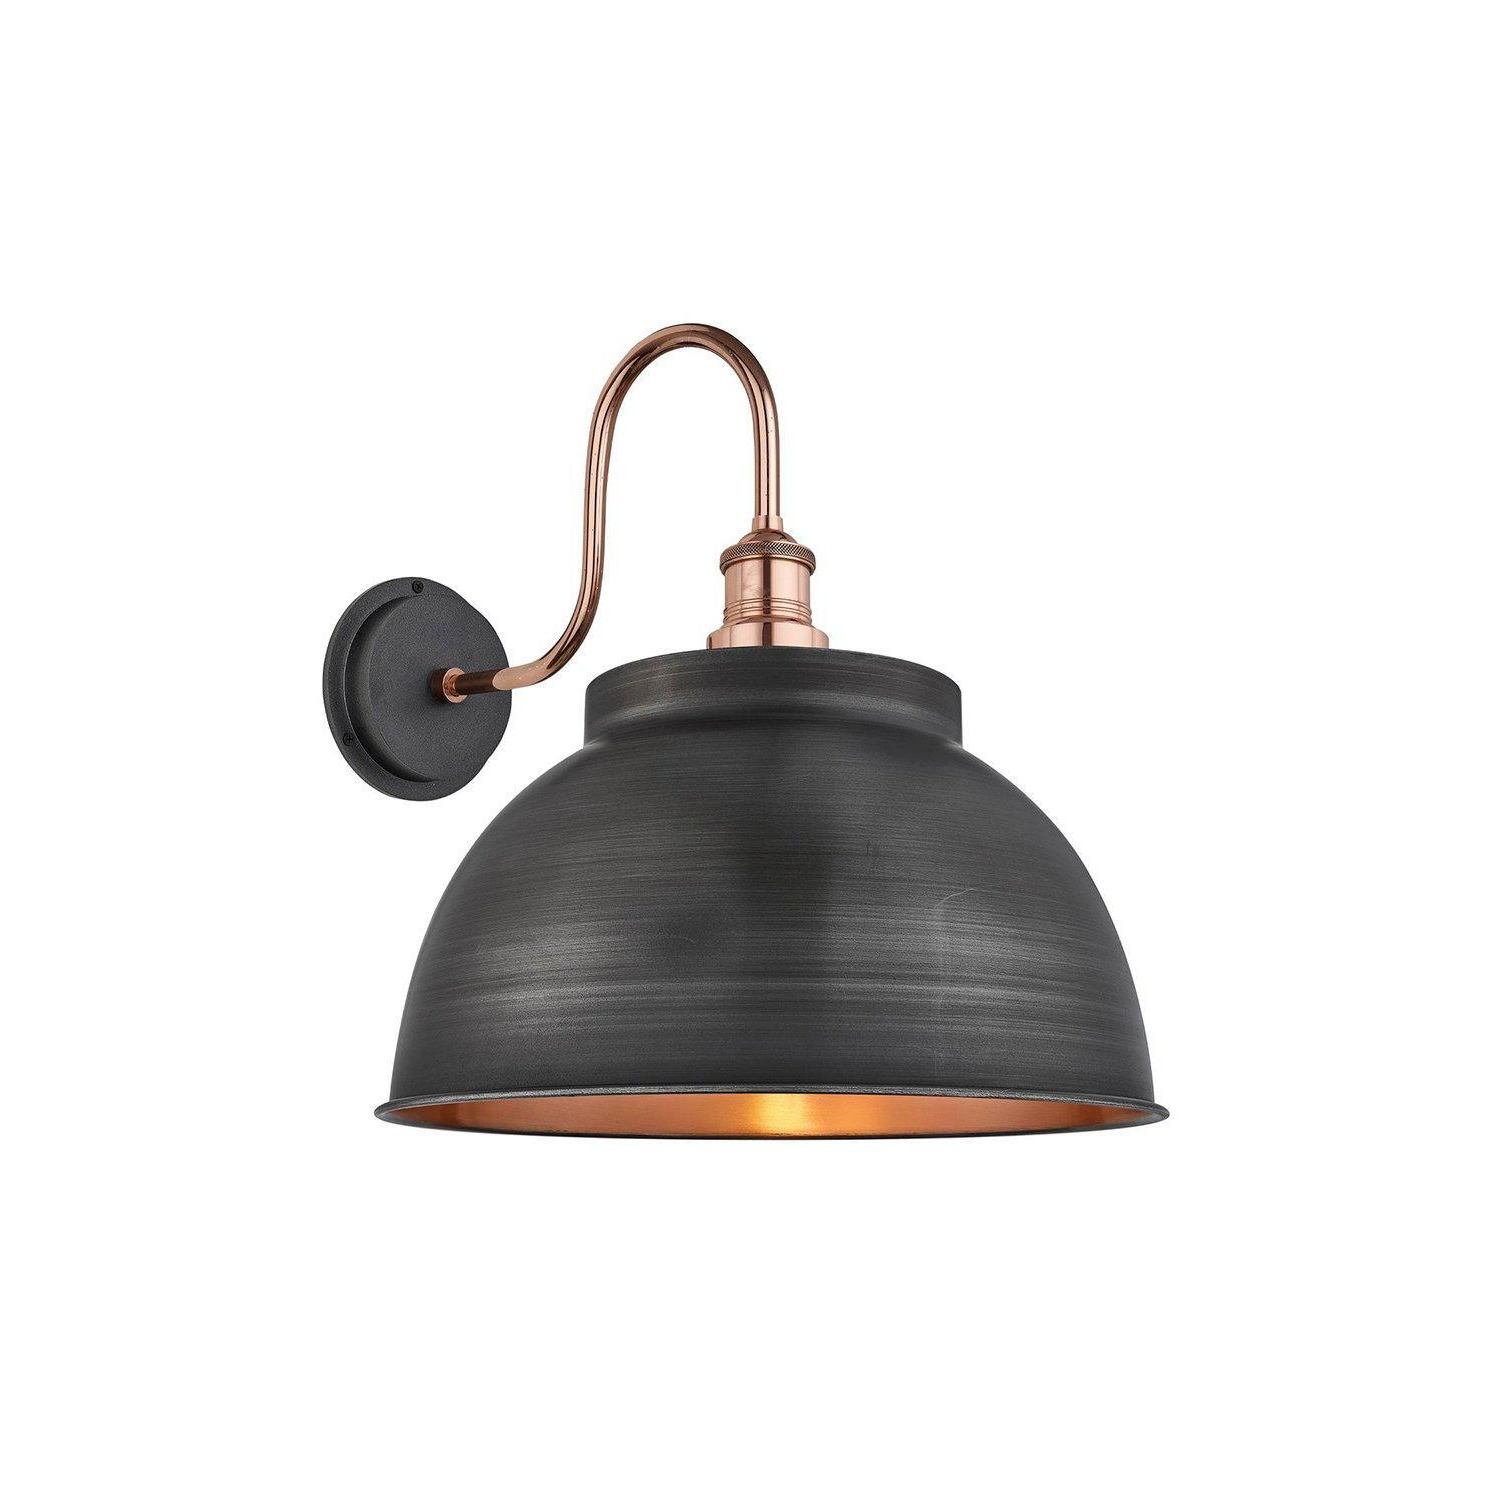 Swan Neck Outdoor & Bathroom Dome Wall Light, 17 Inch, Pewter & Copper, Copper Holder - image 1